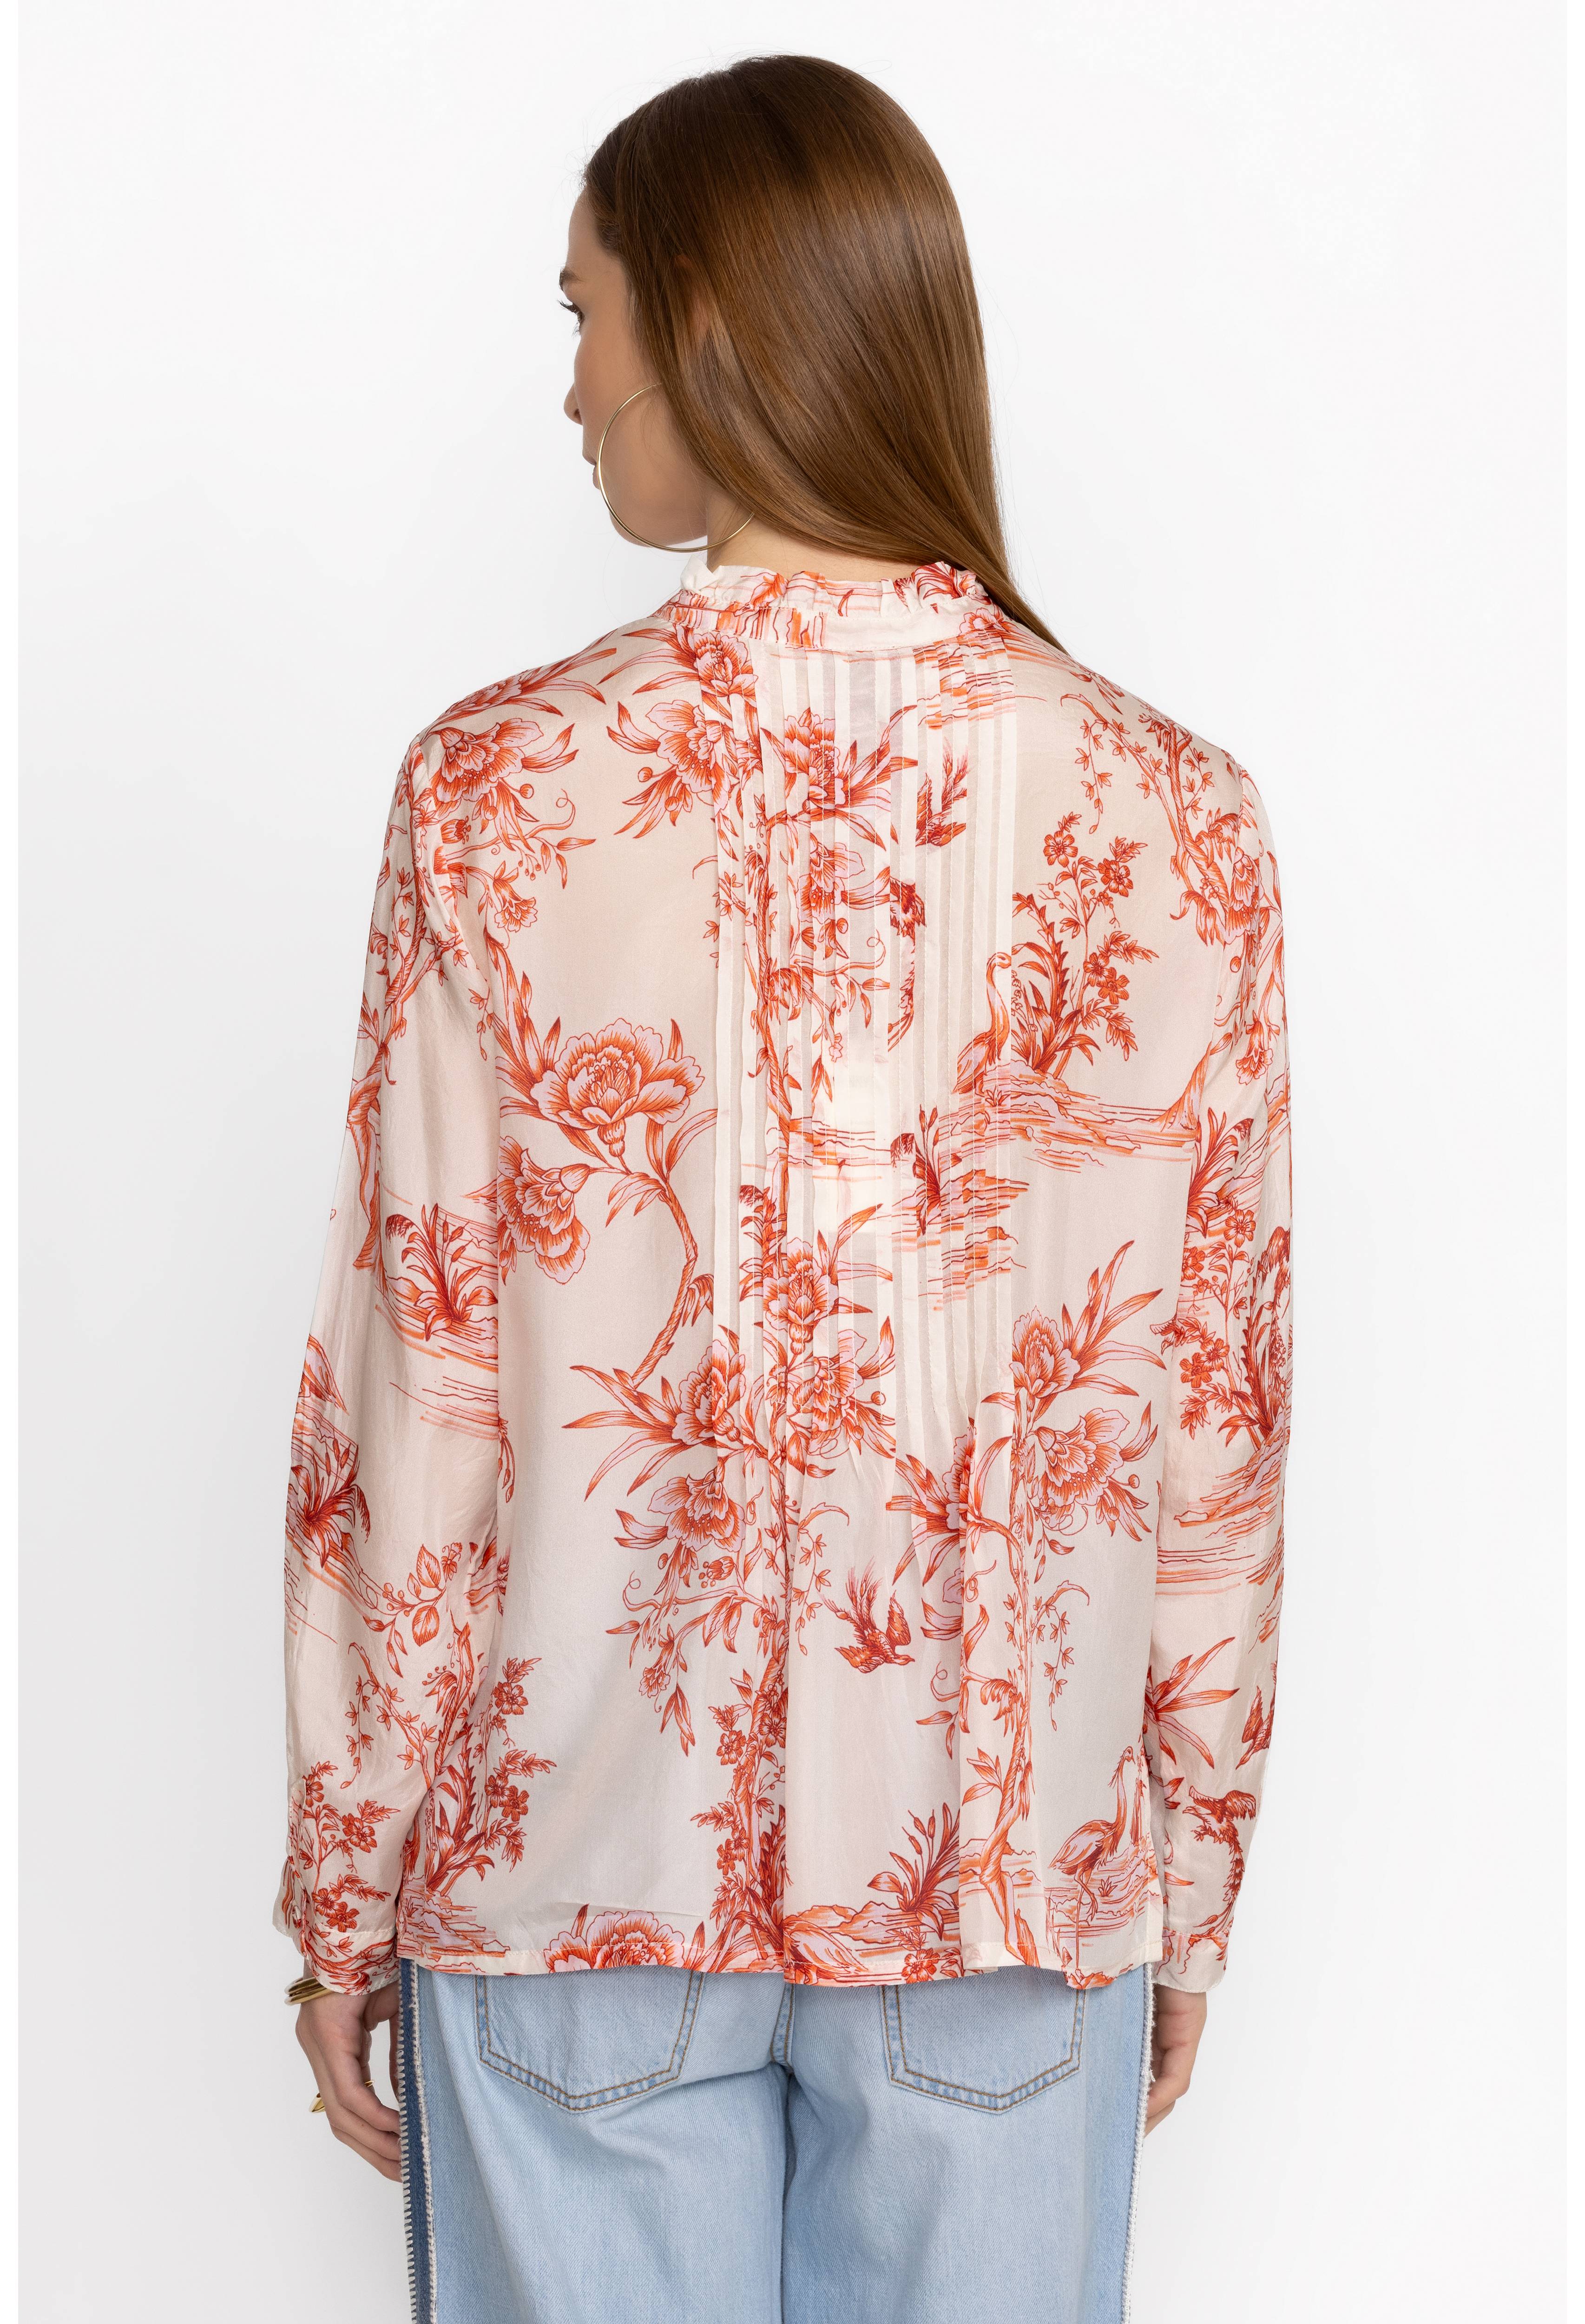 SPRING FIRE MALIA  BLOUSE, , large image number 5